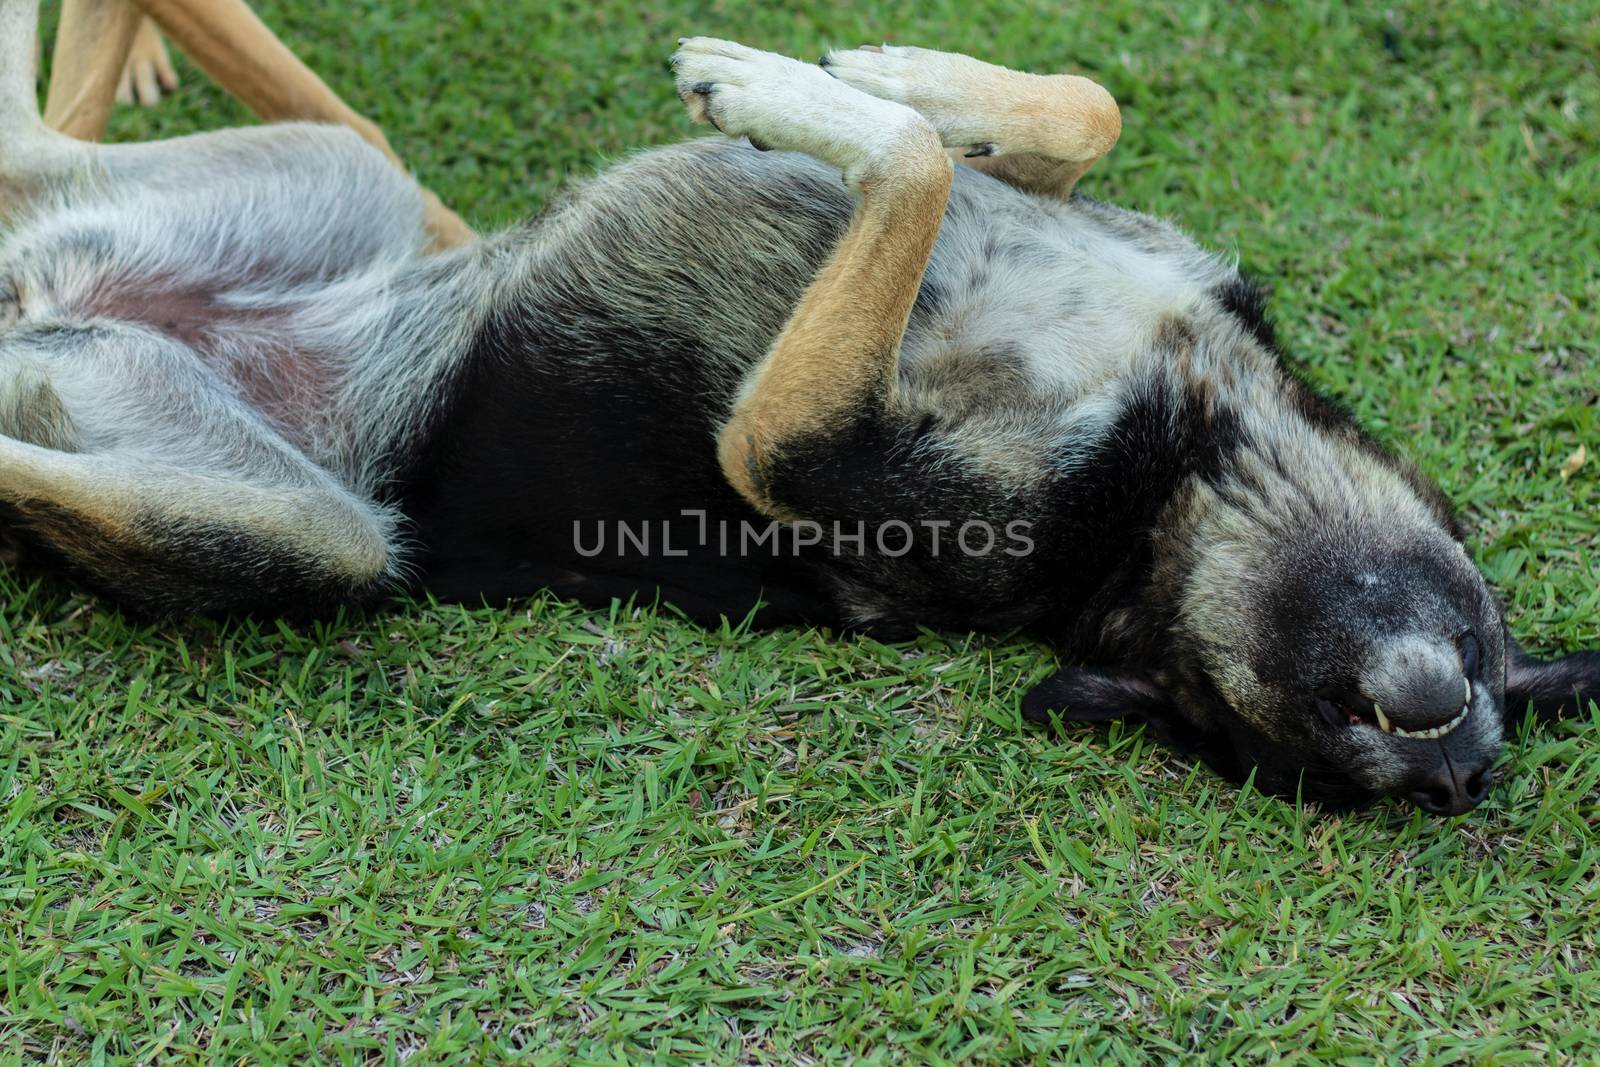 cute adult stray dog rolling on grass. he looks happy and photo has taken at izmir/turkey.